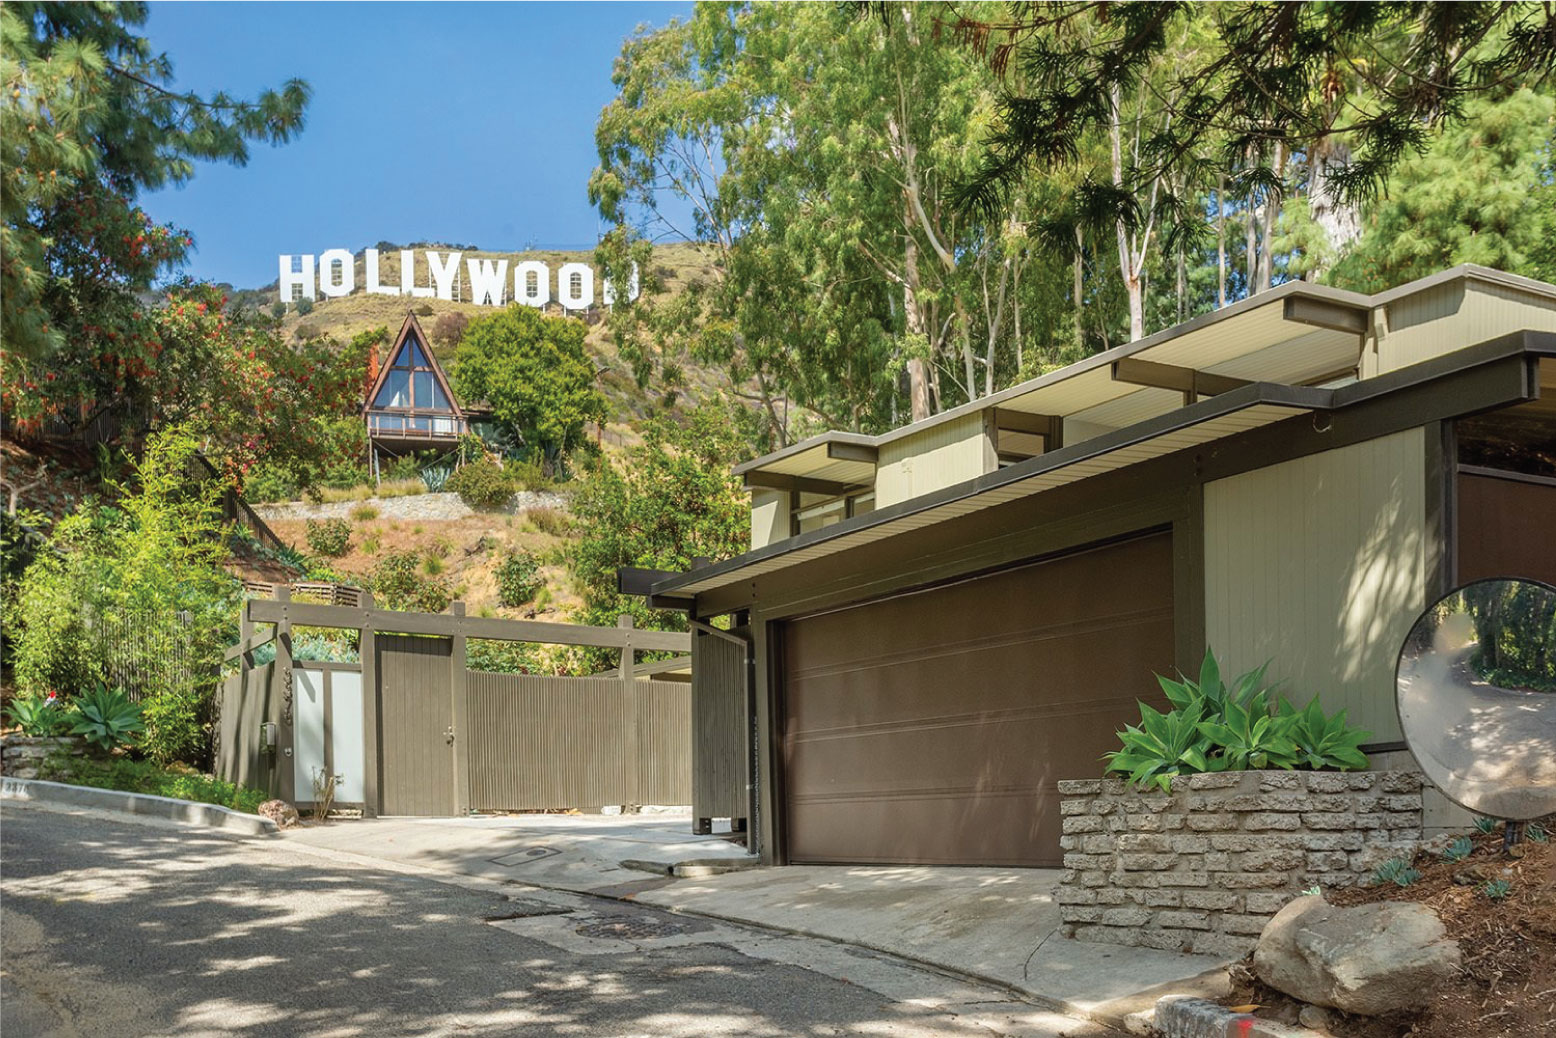 home at the base of the Hollywood sign